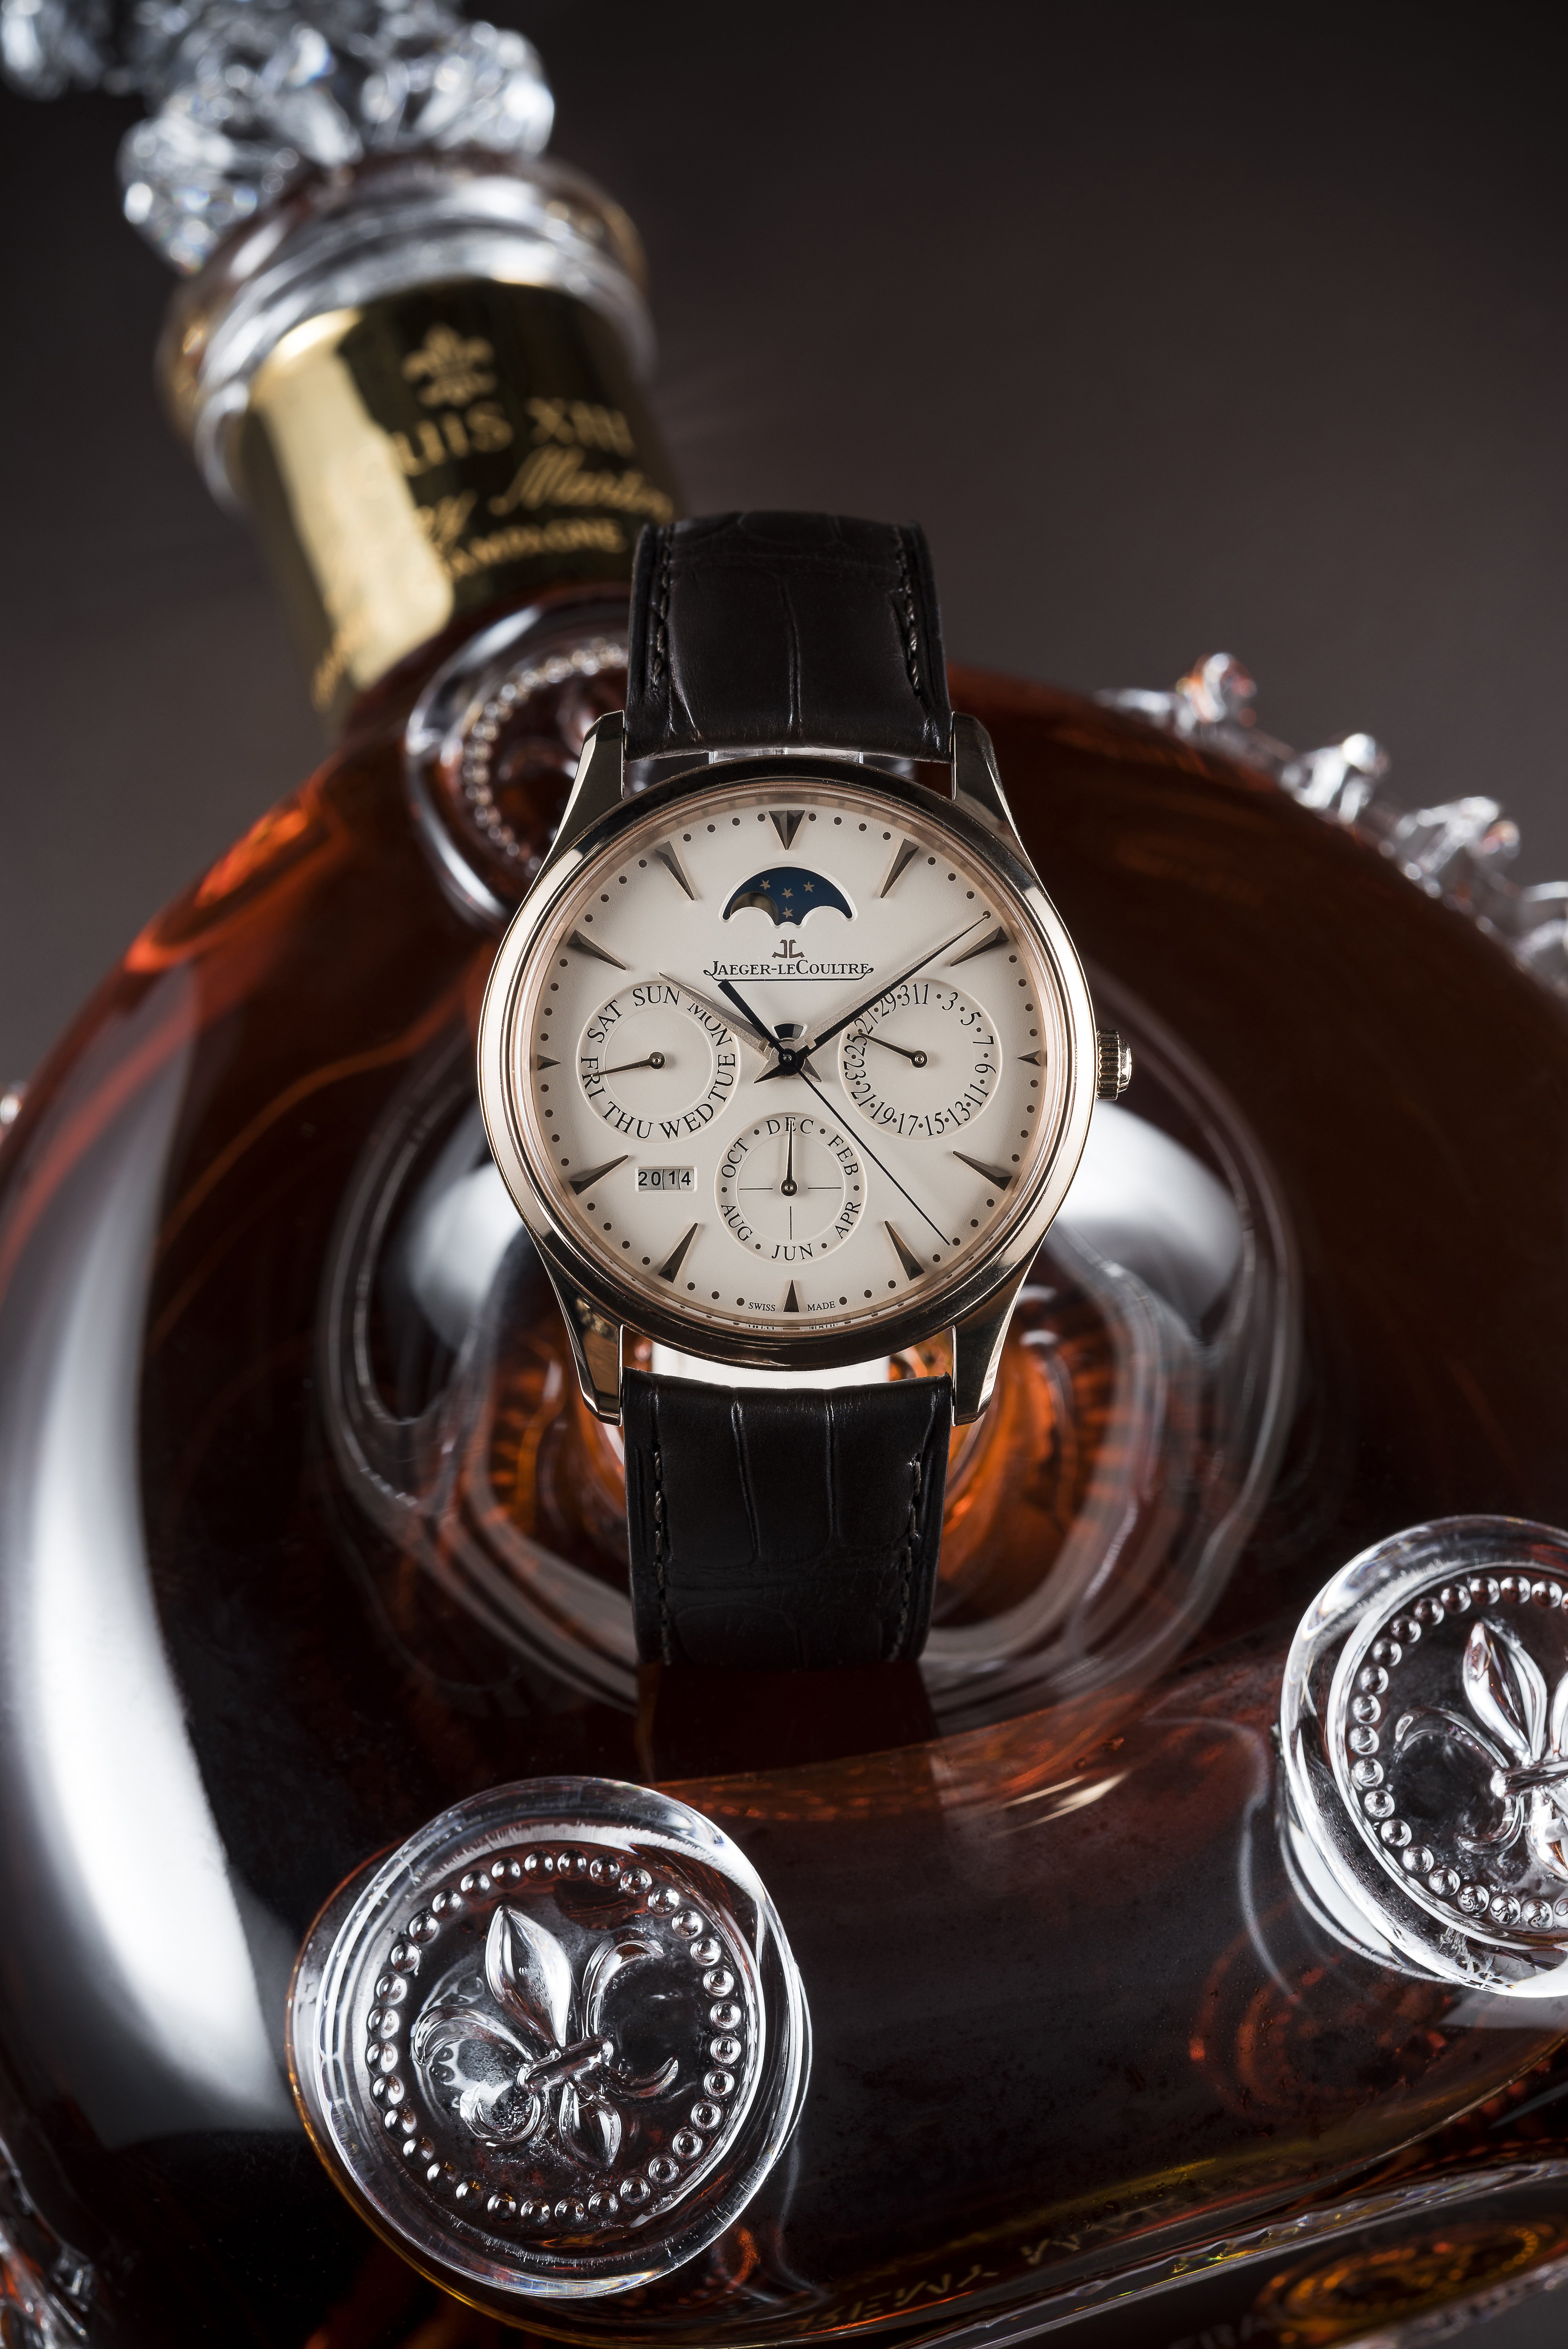 Louis XIII and Jaeger-LeCoultre Master Ultra-Thin Perpetual Calendar